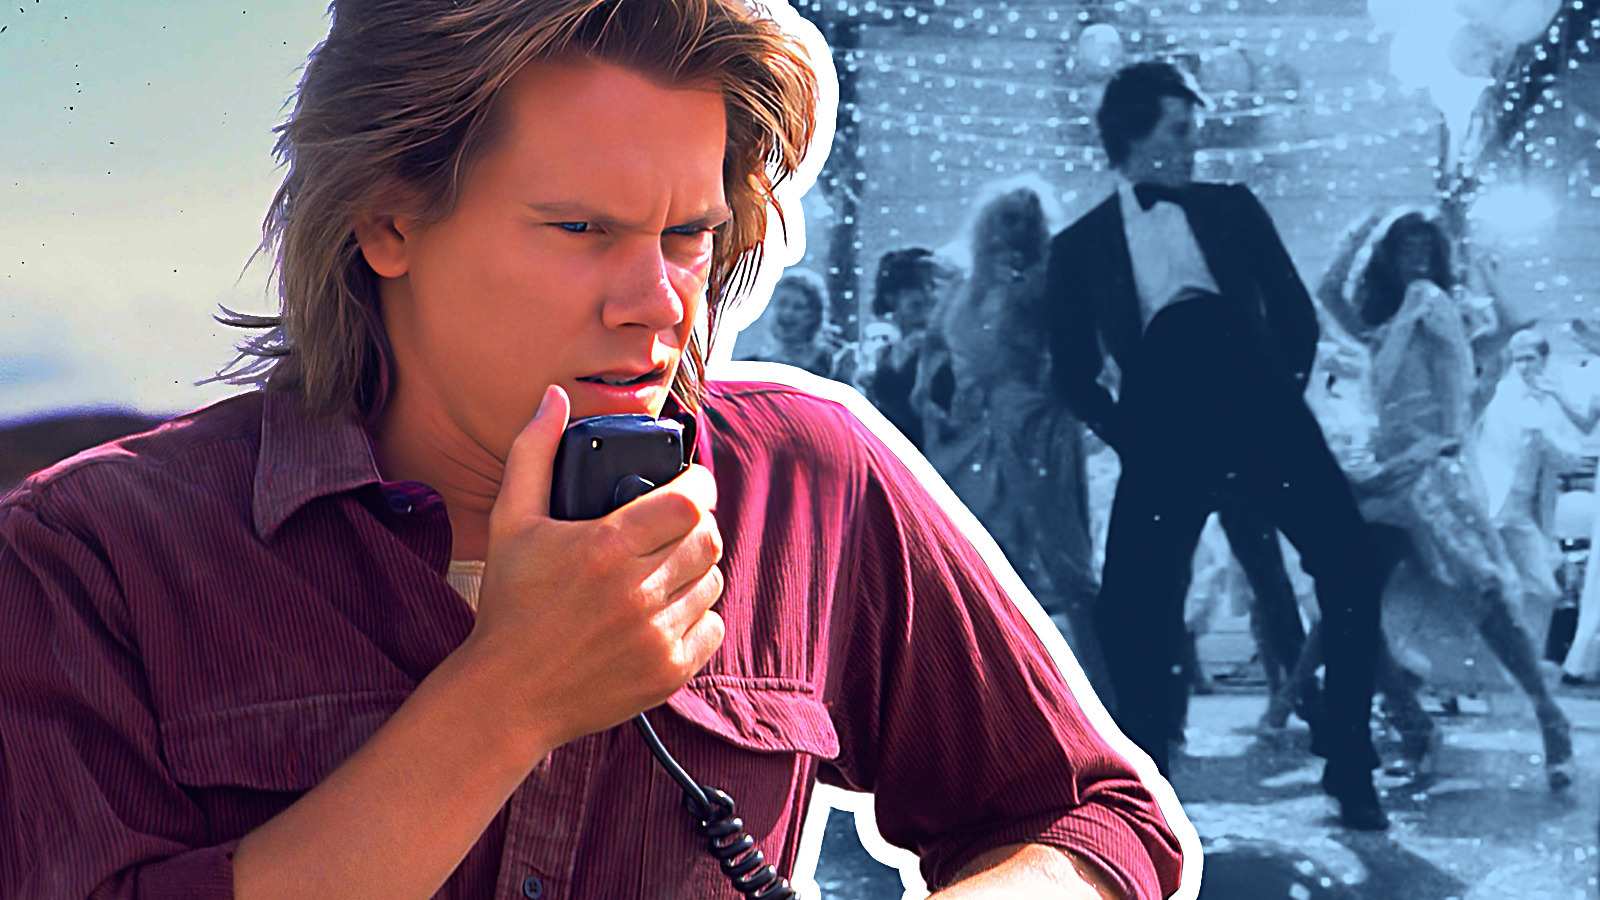 The Shocking Kevin Bacon Theory Revealed: Why Tremors is Secretly a Sequel to Footloose” – catchy SEO title with keywords “Kevin Bacon Theory”, “Tremors”, “Footloose Sequel